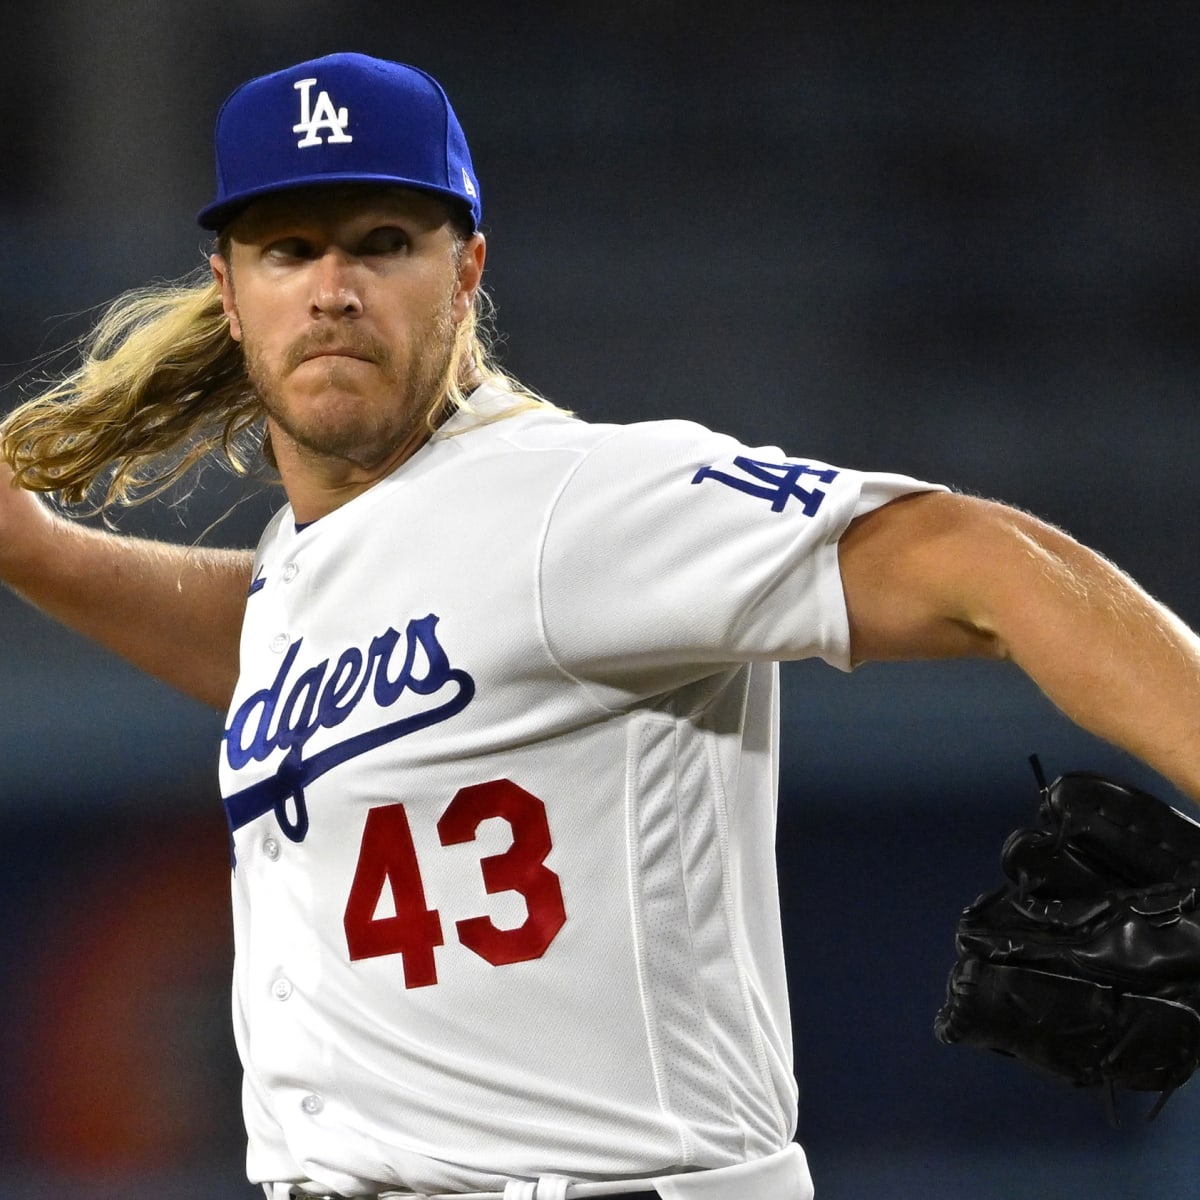 Dodgers sign Noah Syndergaard with chance to revive his career